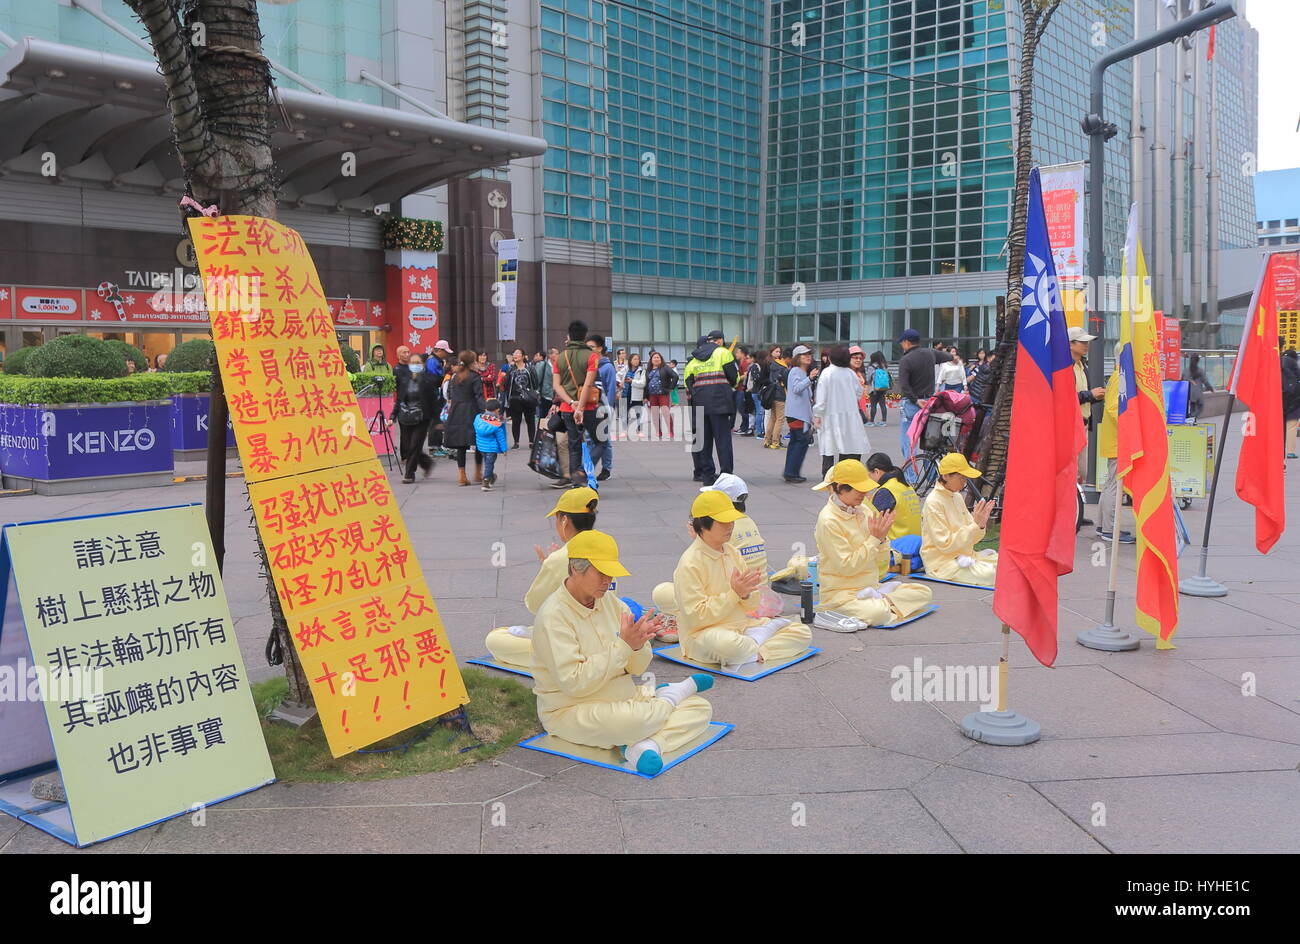 Falun Gong practitioner protests against Chinese communist party in Taipei Taiwan. Falun Gong is a Chinese spiritual practice viewed as a potential th Stock Photo